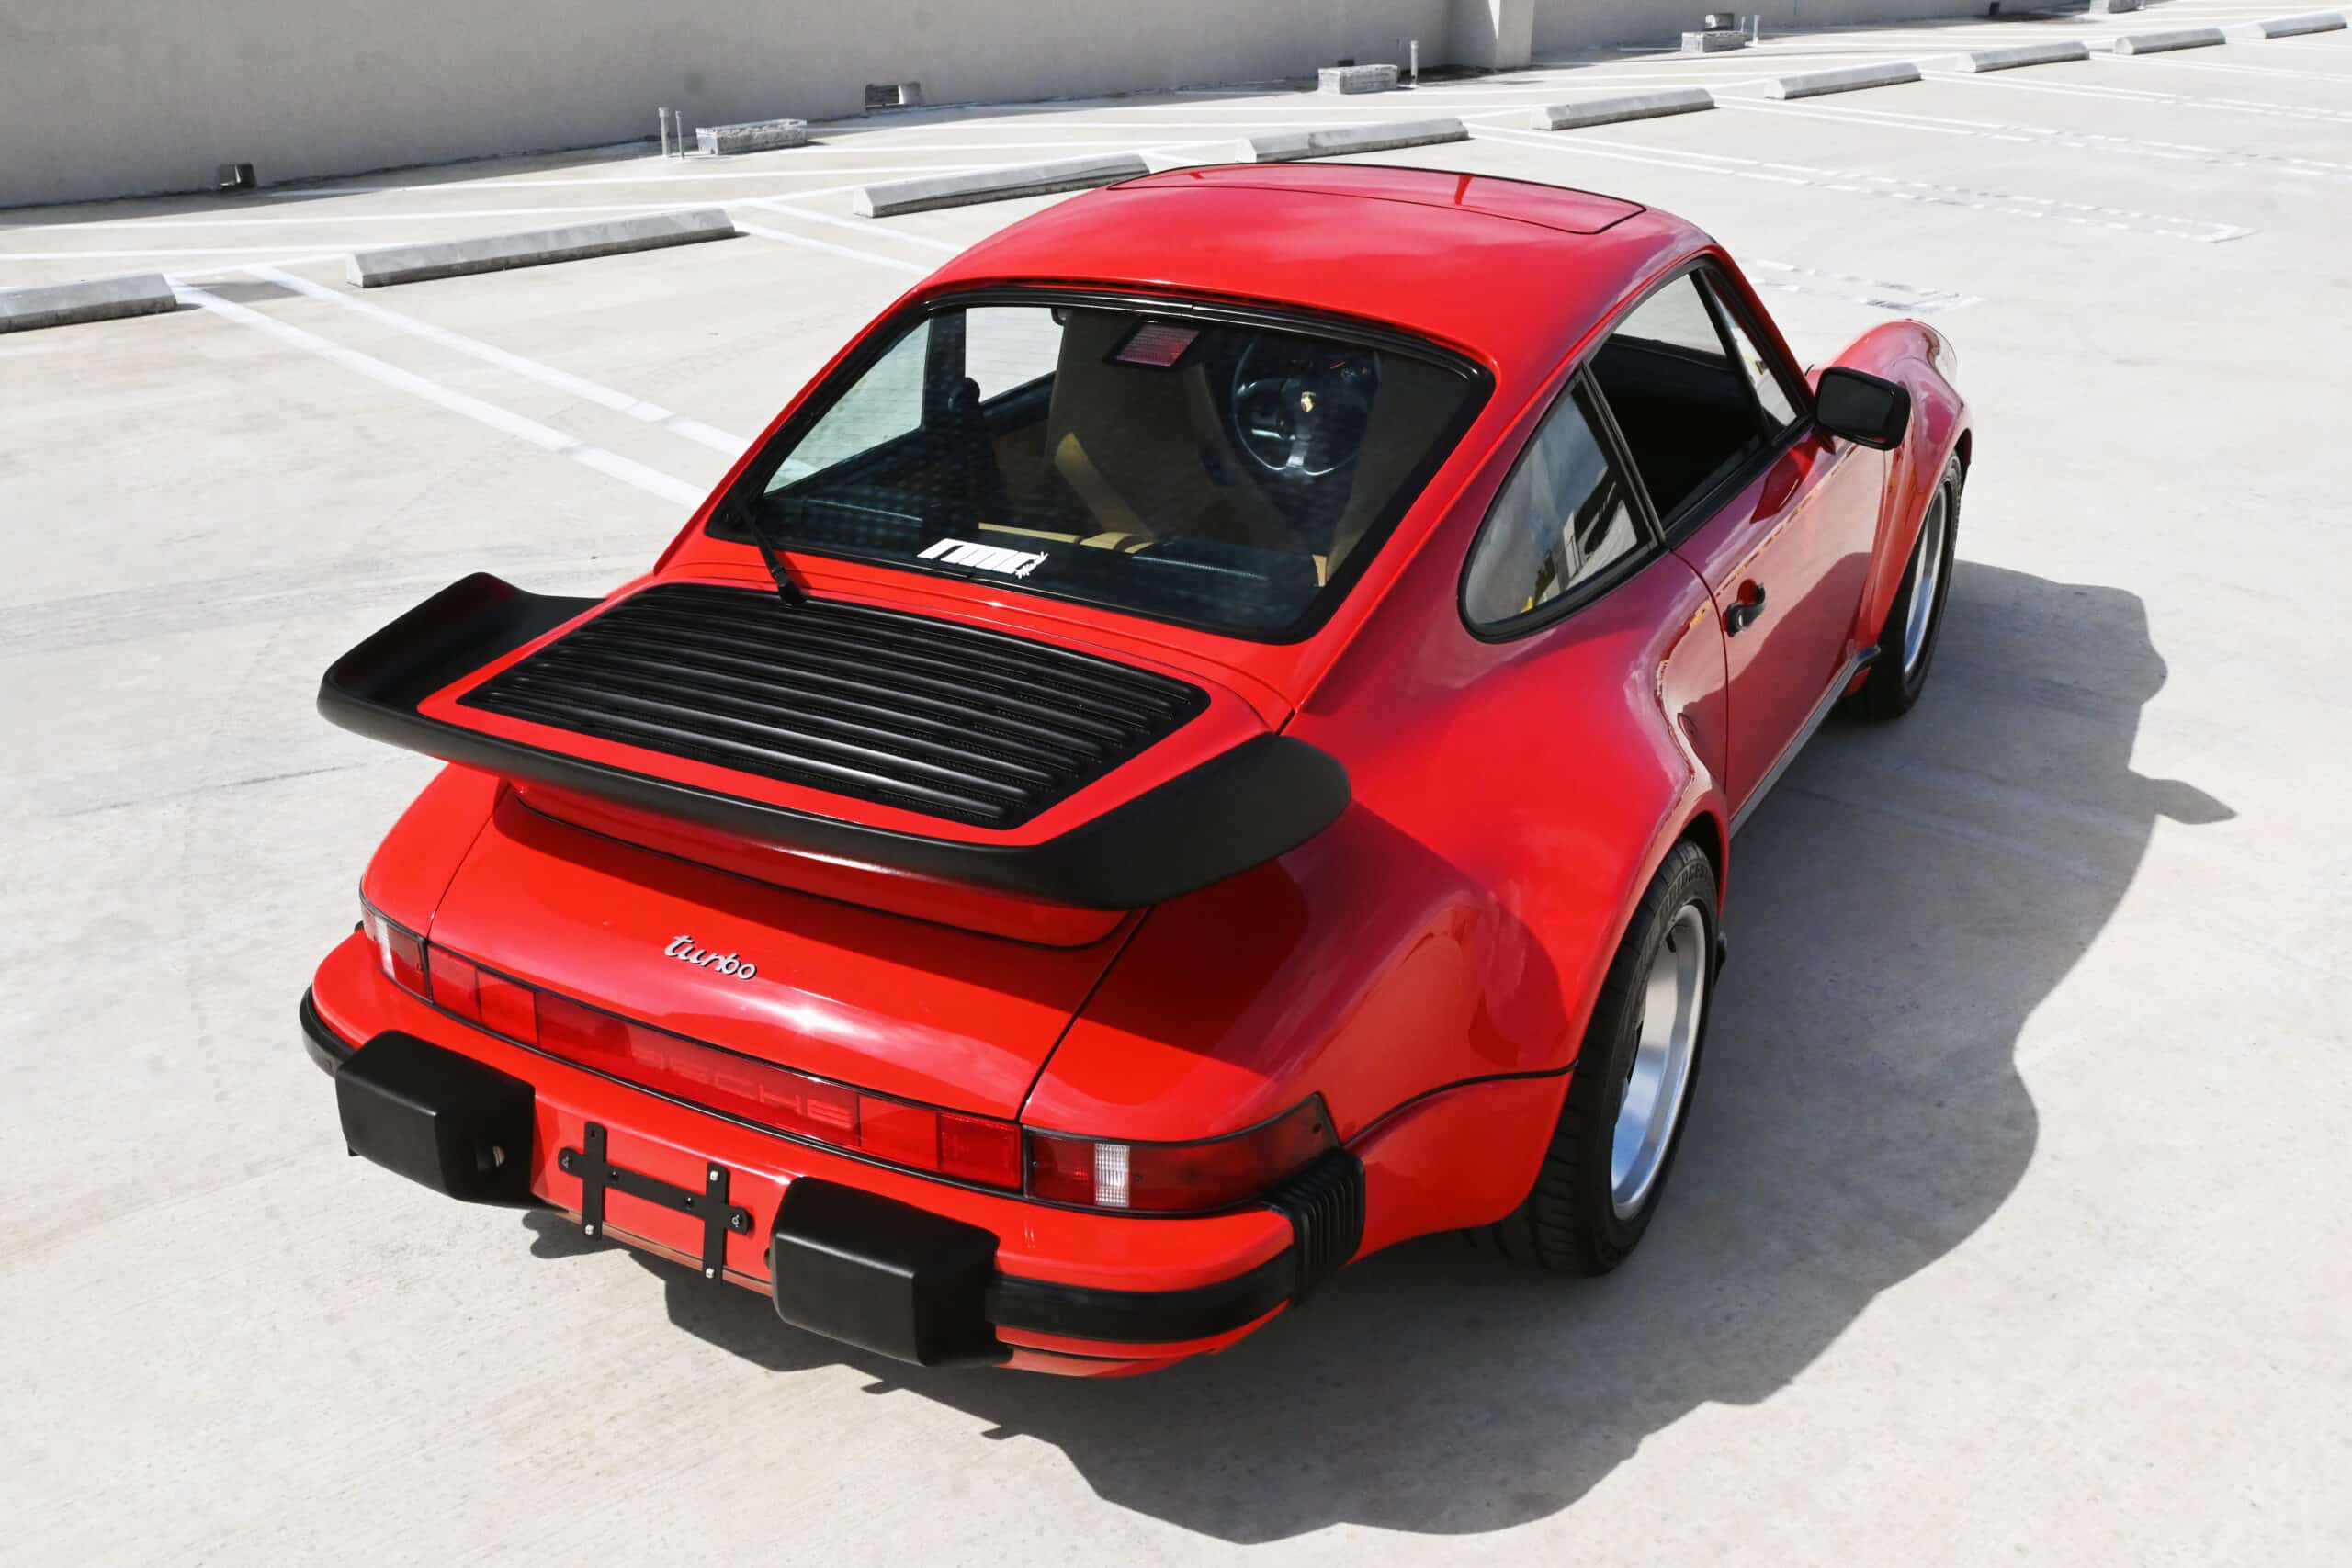 1987 Porsche 930 Turbo Unmodified / Outstanding Condition / Factory LSD / Low Miles / Service Records